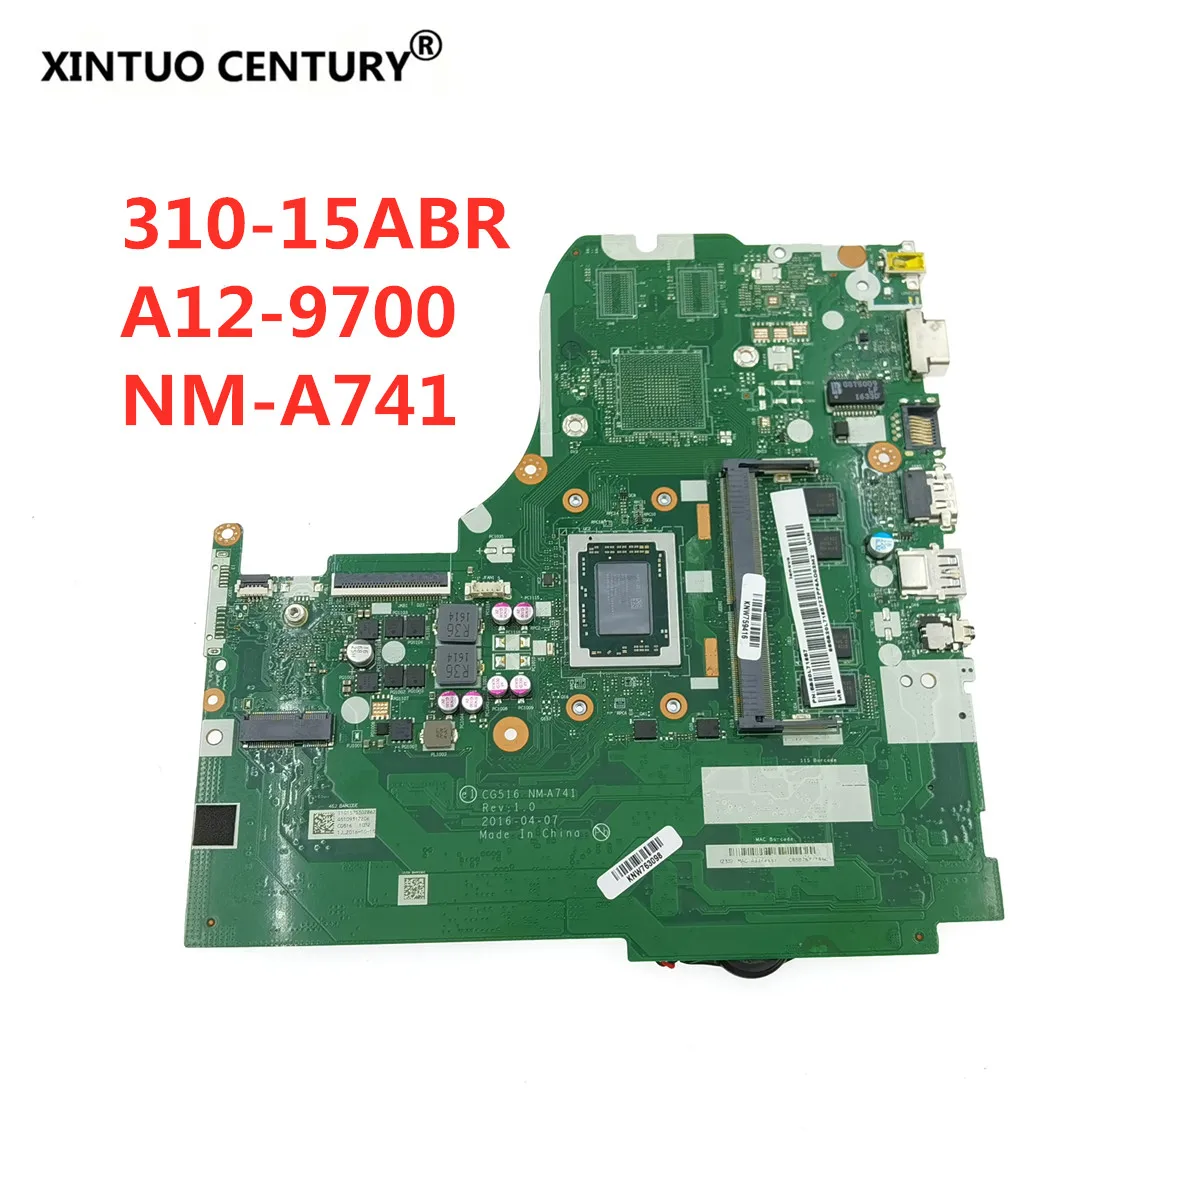 For Lenovo Ideapad 310-15ABR notebook motherboard CG516 NM-A741 is suitable 5B20L71644 CPU A12-9700 4G RAM 100% test work | Компьютеры и